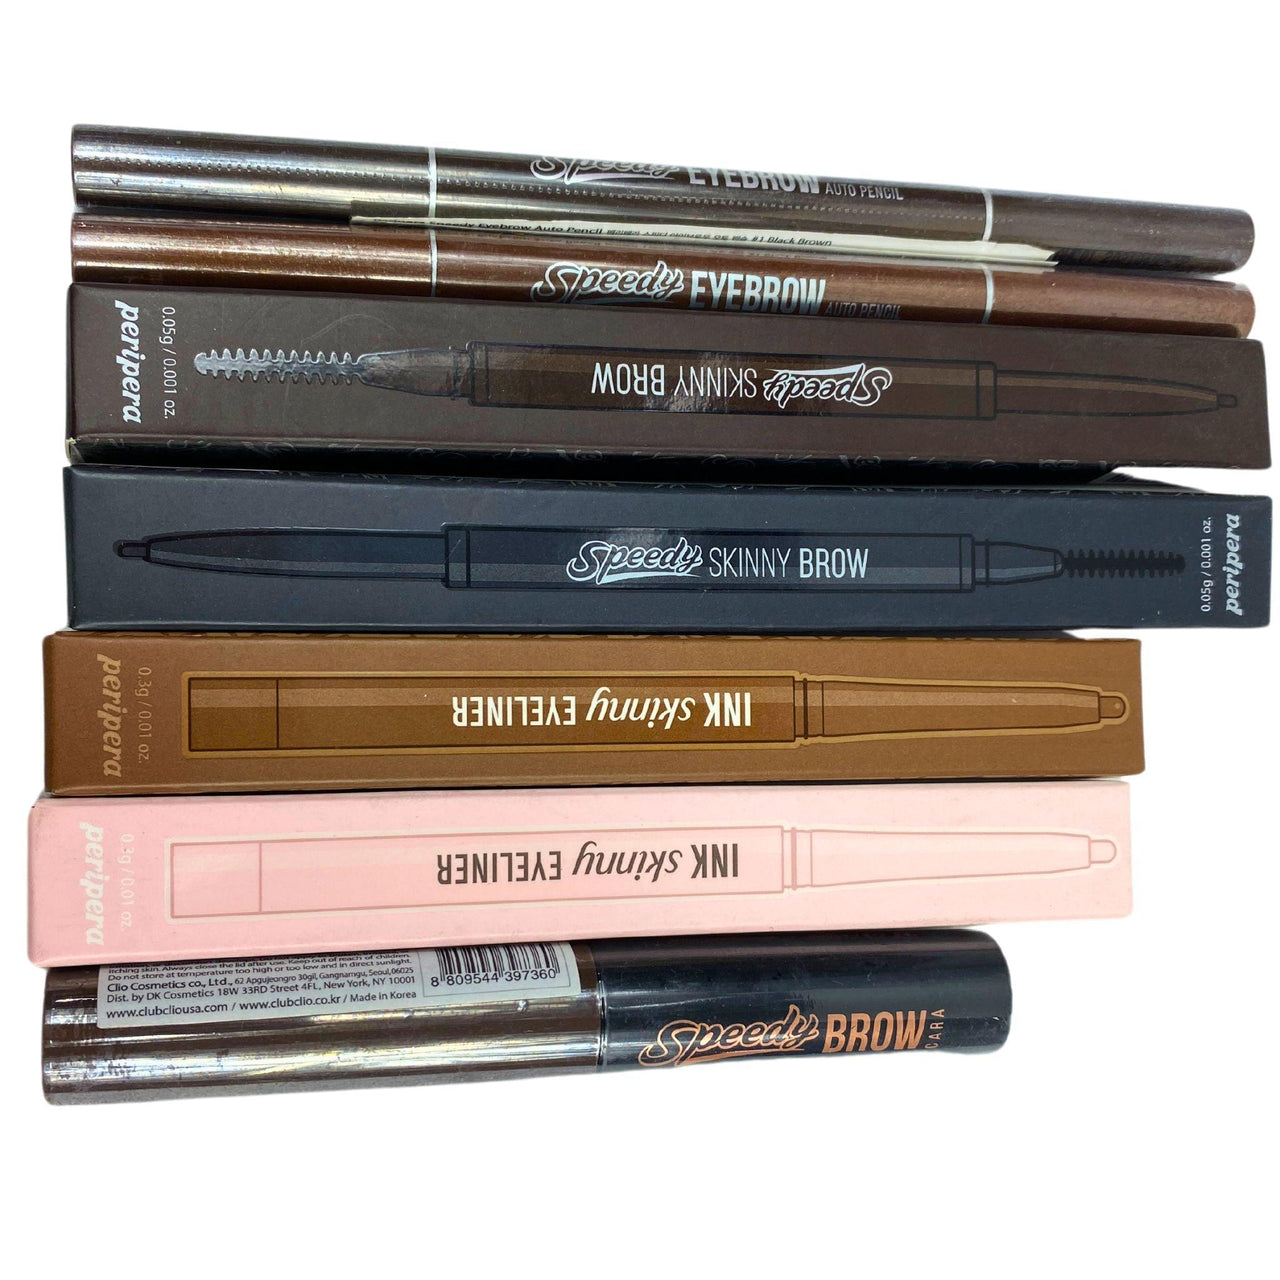 Peripera Brow Pencils And Eyeliners Assorted (70 Pcs Lot) - Discount Wholesalers Inc